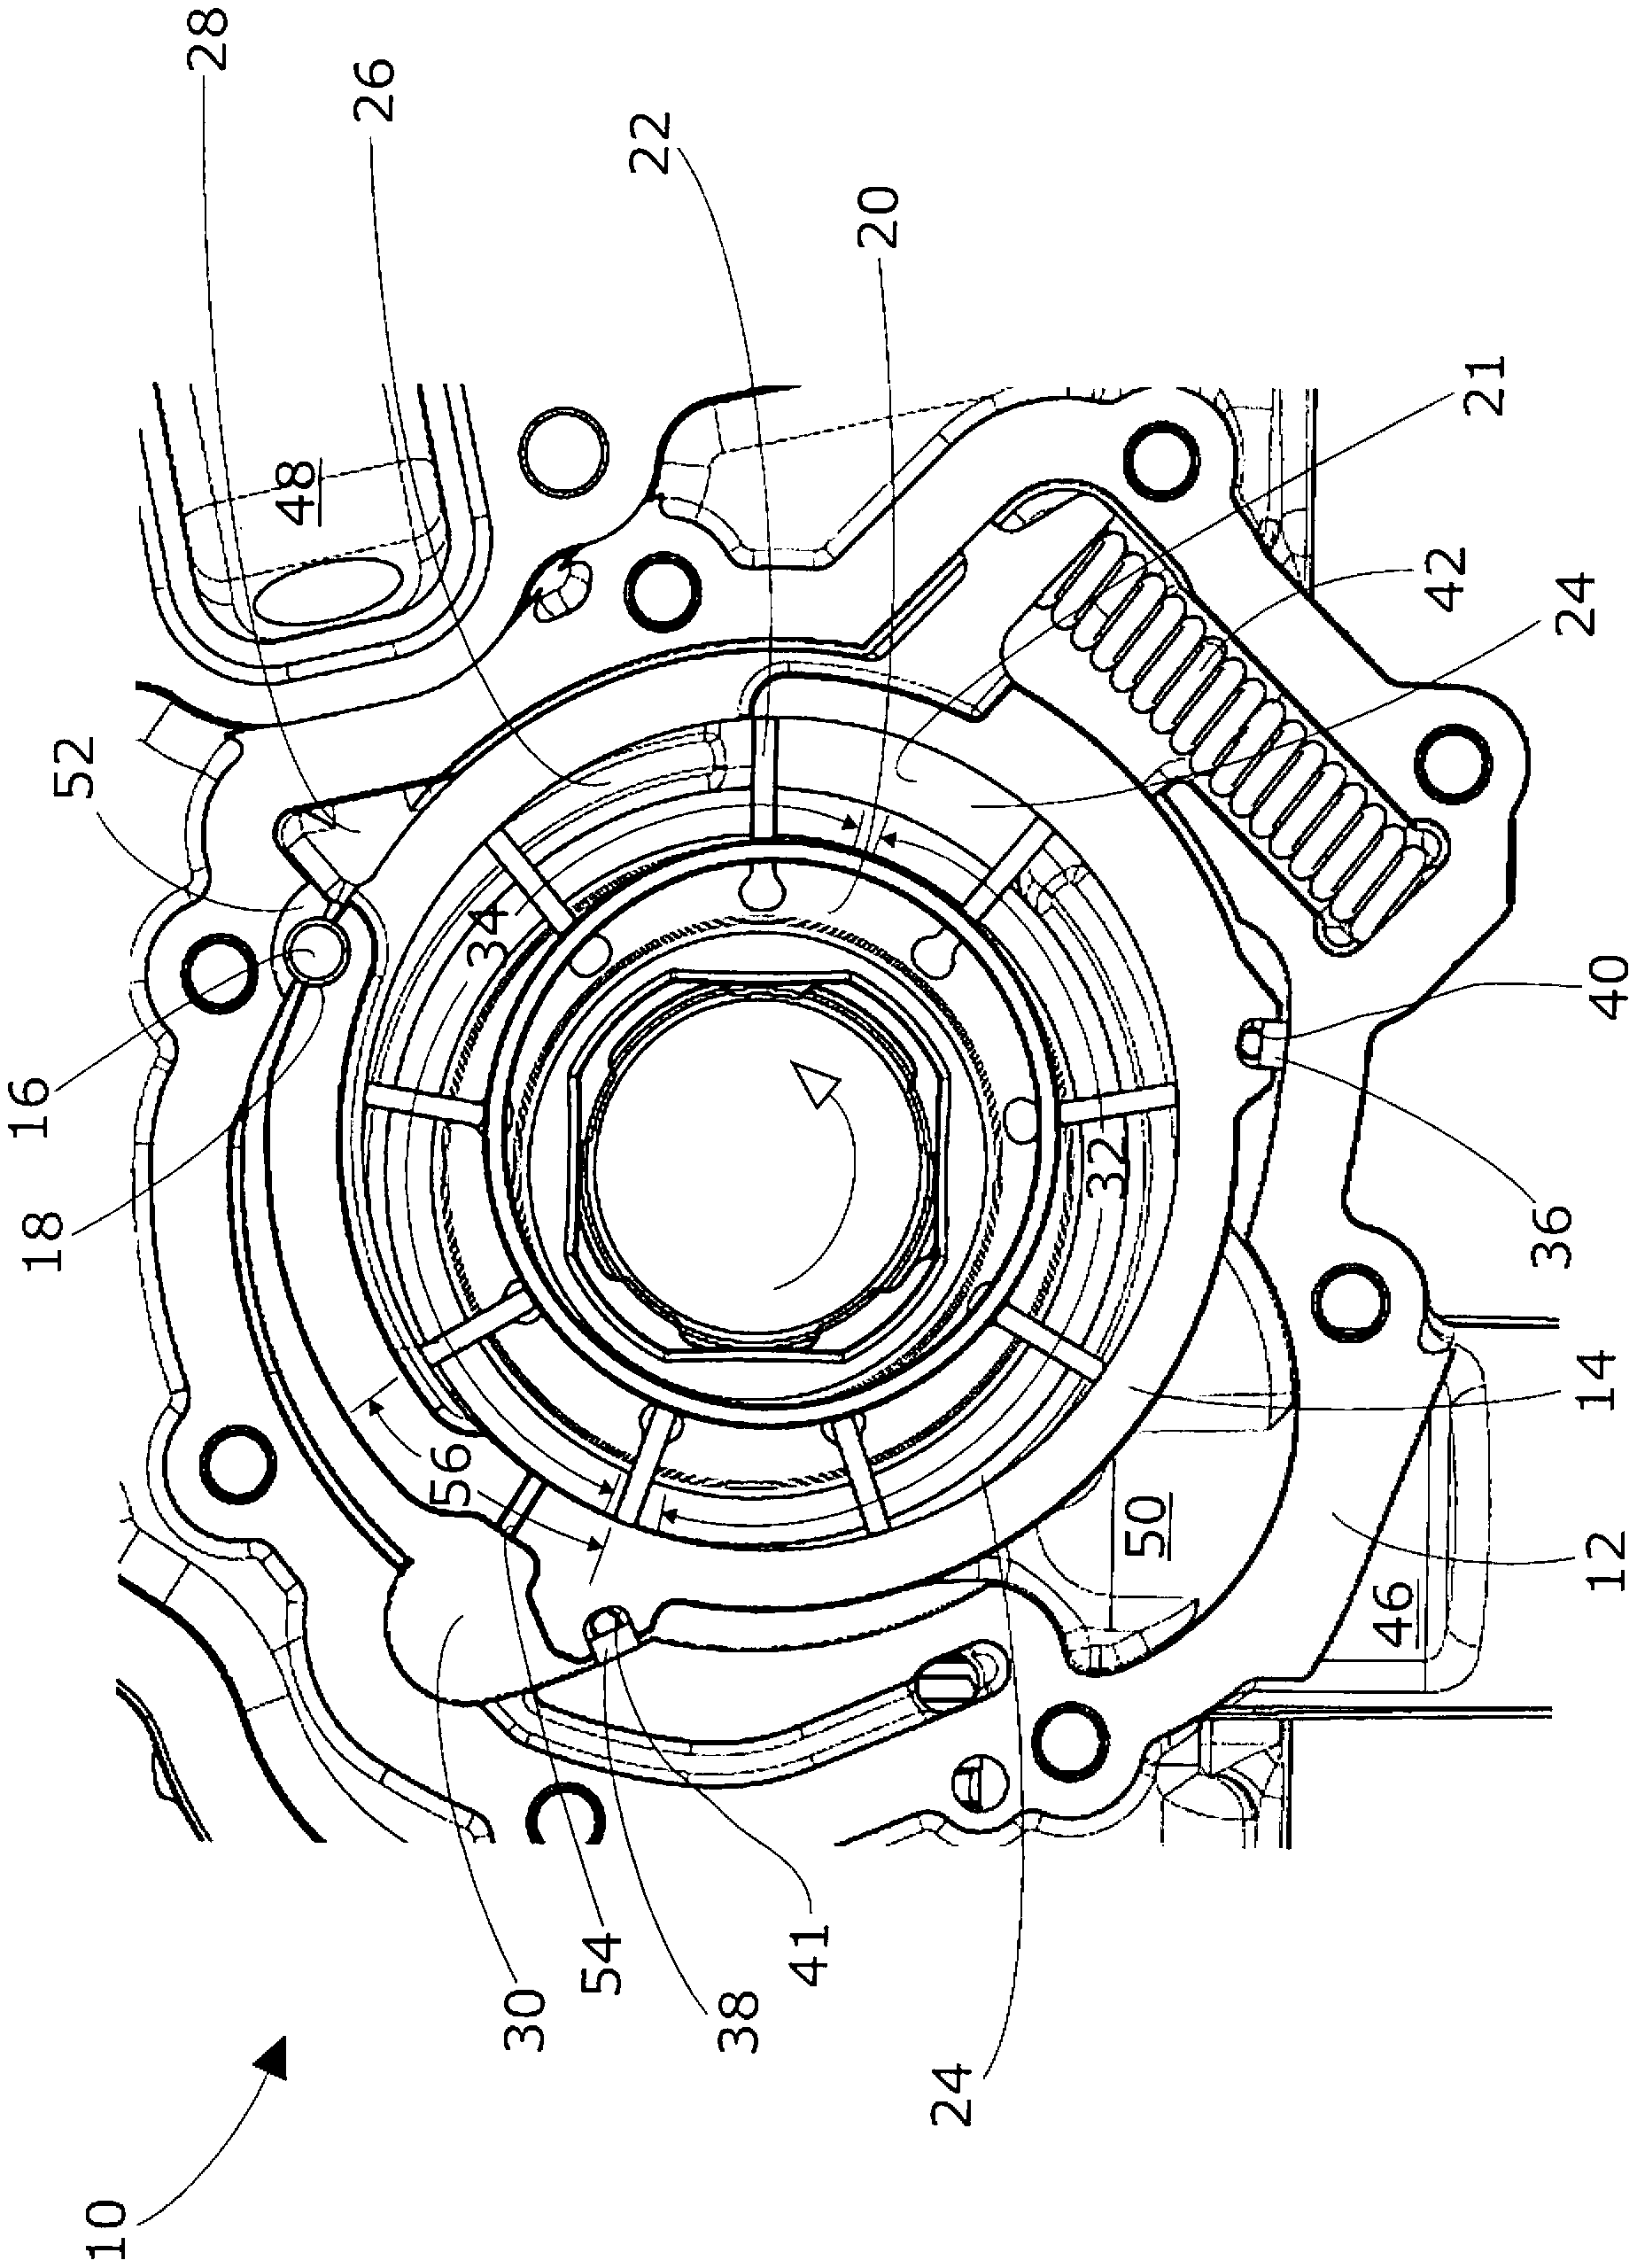 Variable displacement lubricant pump